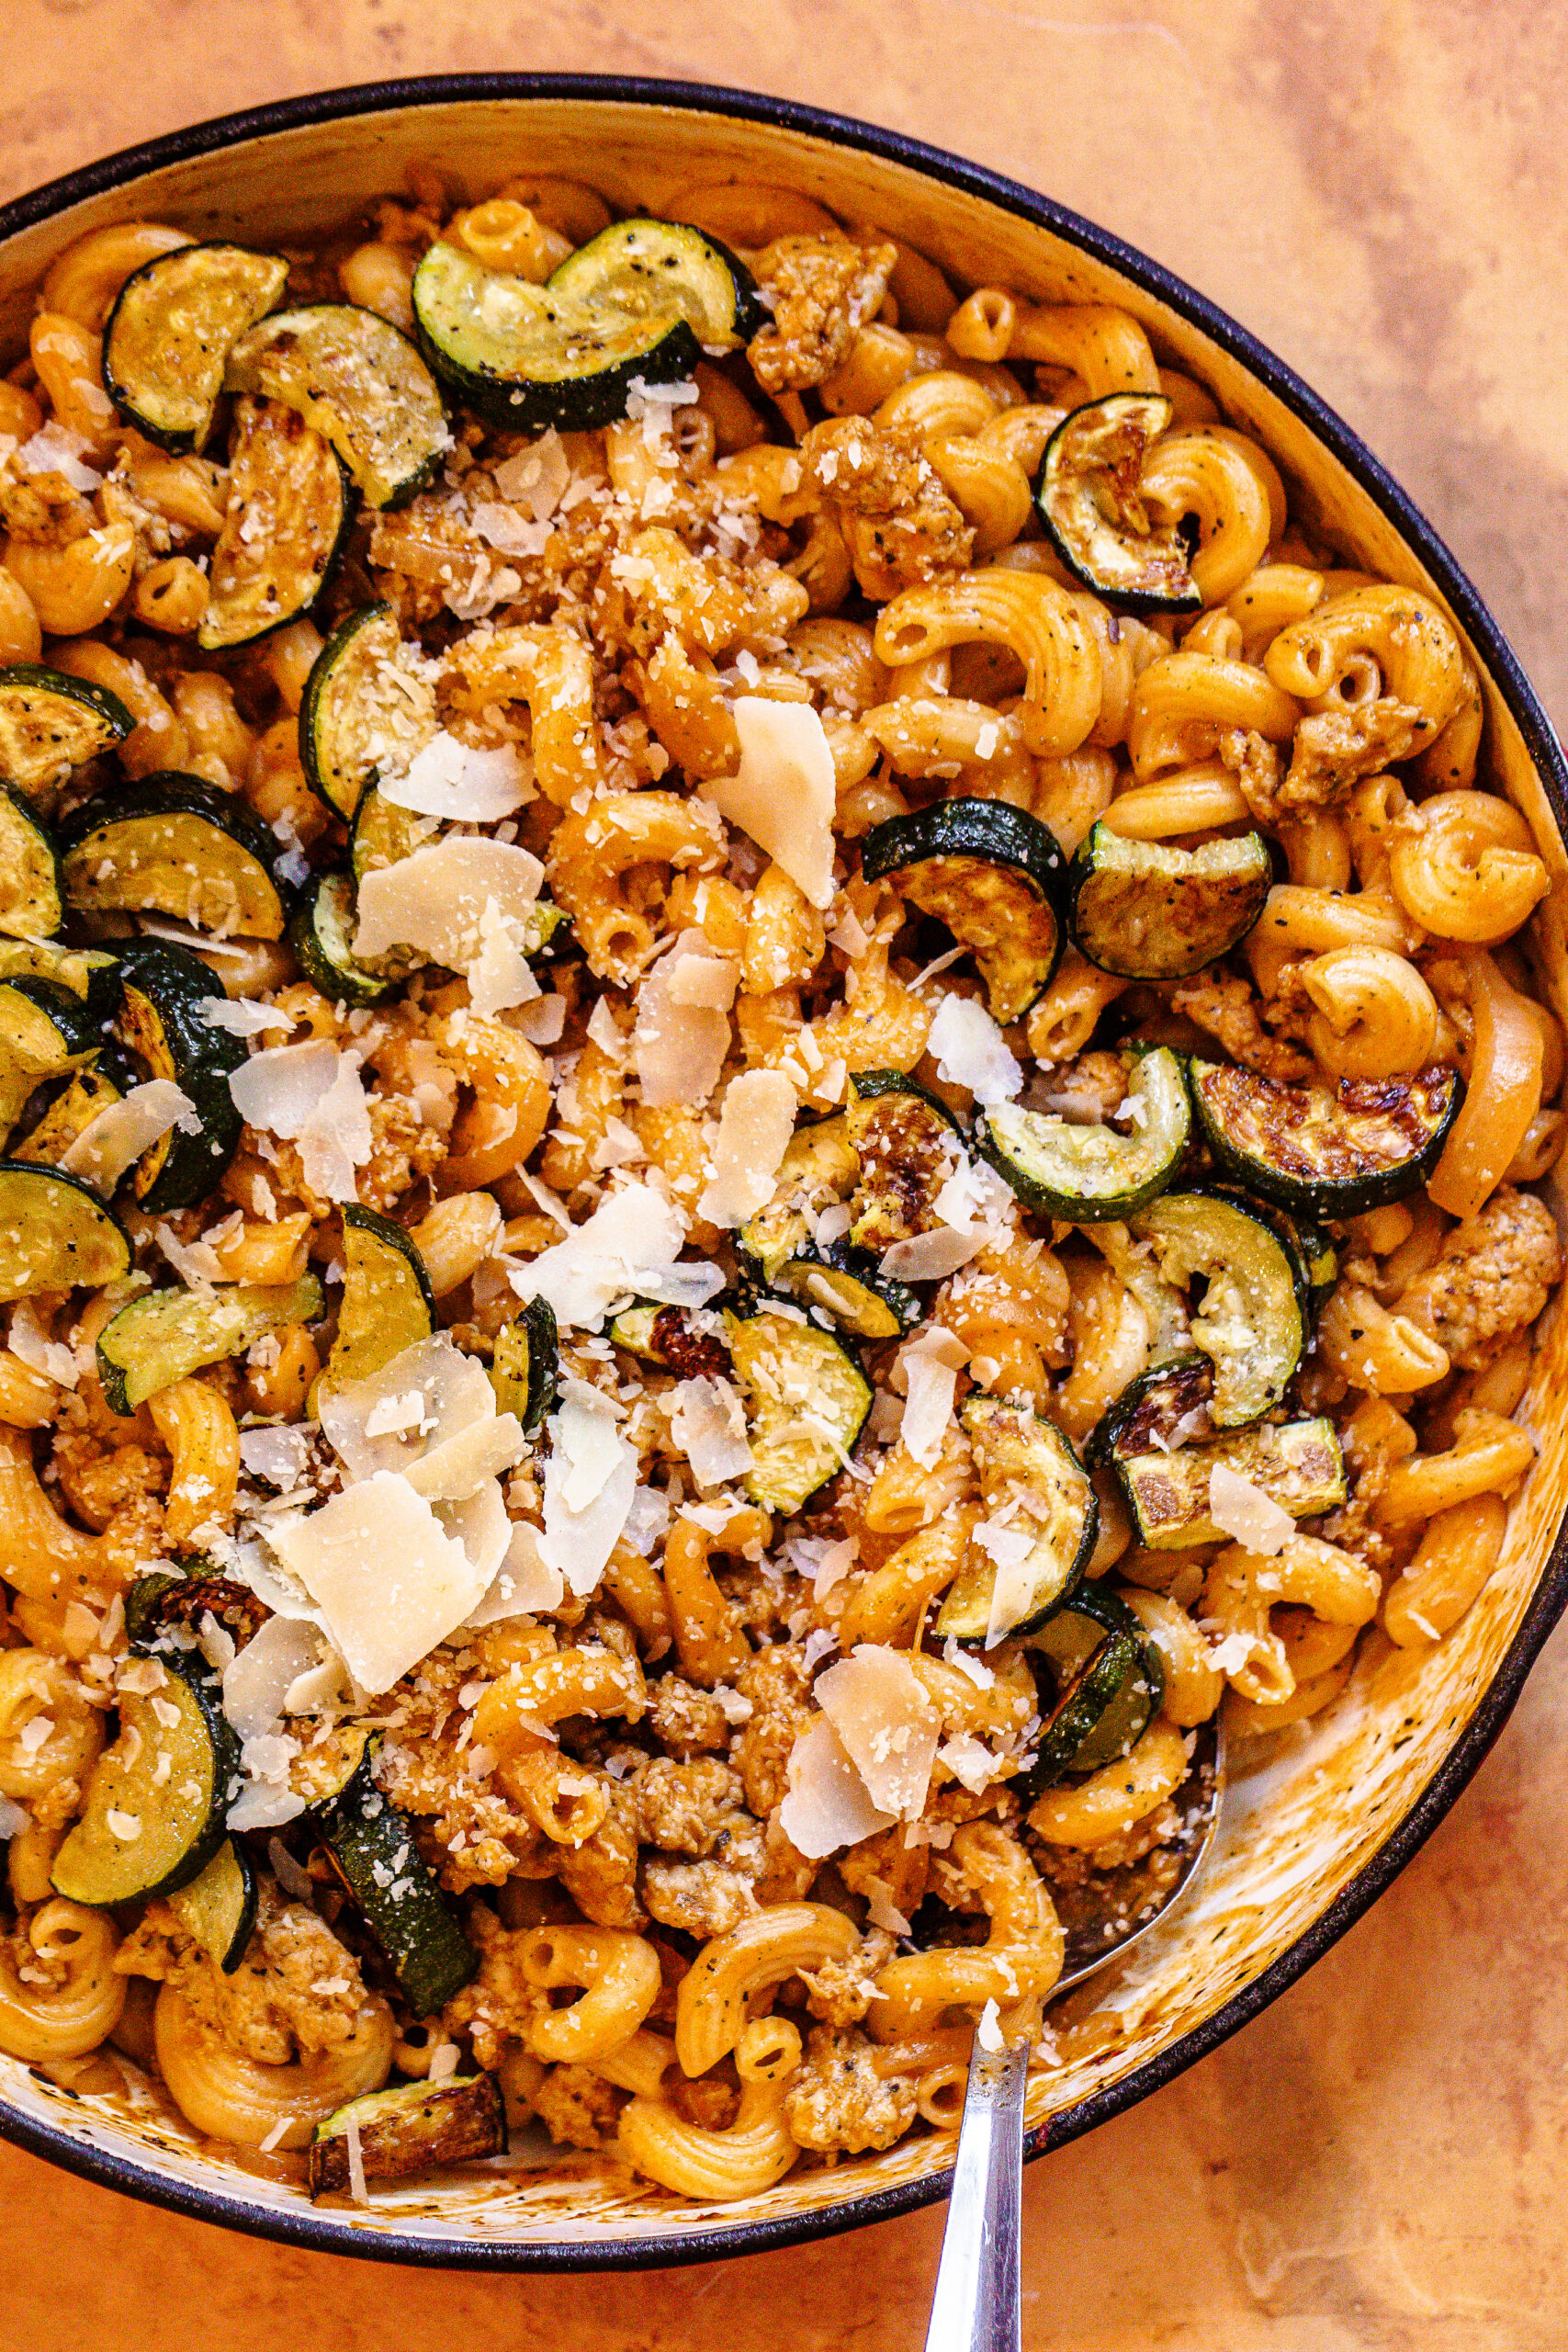 New! Delicious Italian Sausage Pasta with Zucchini (with 4 spin-offs)